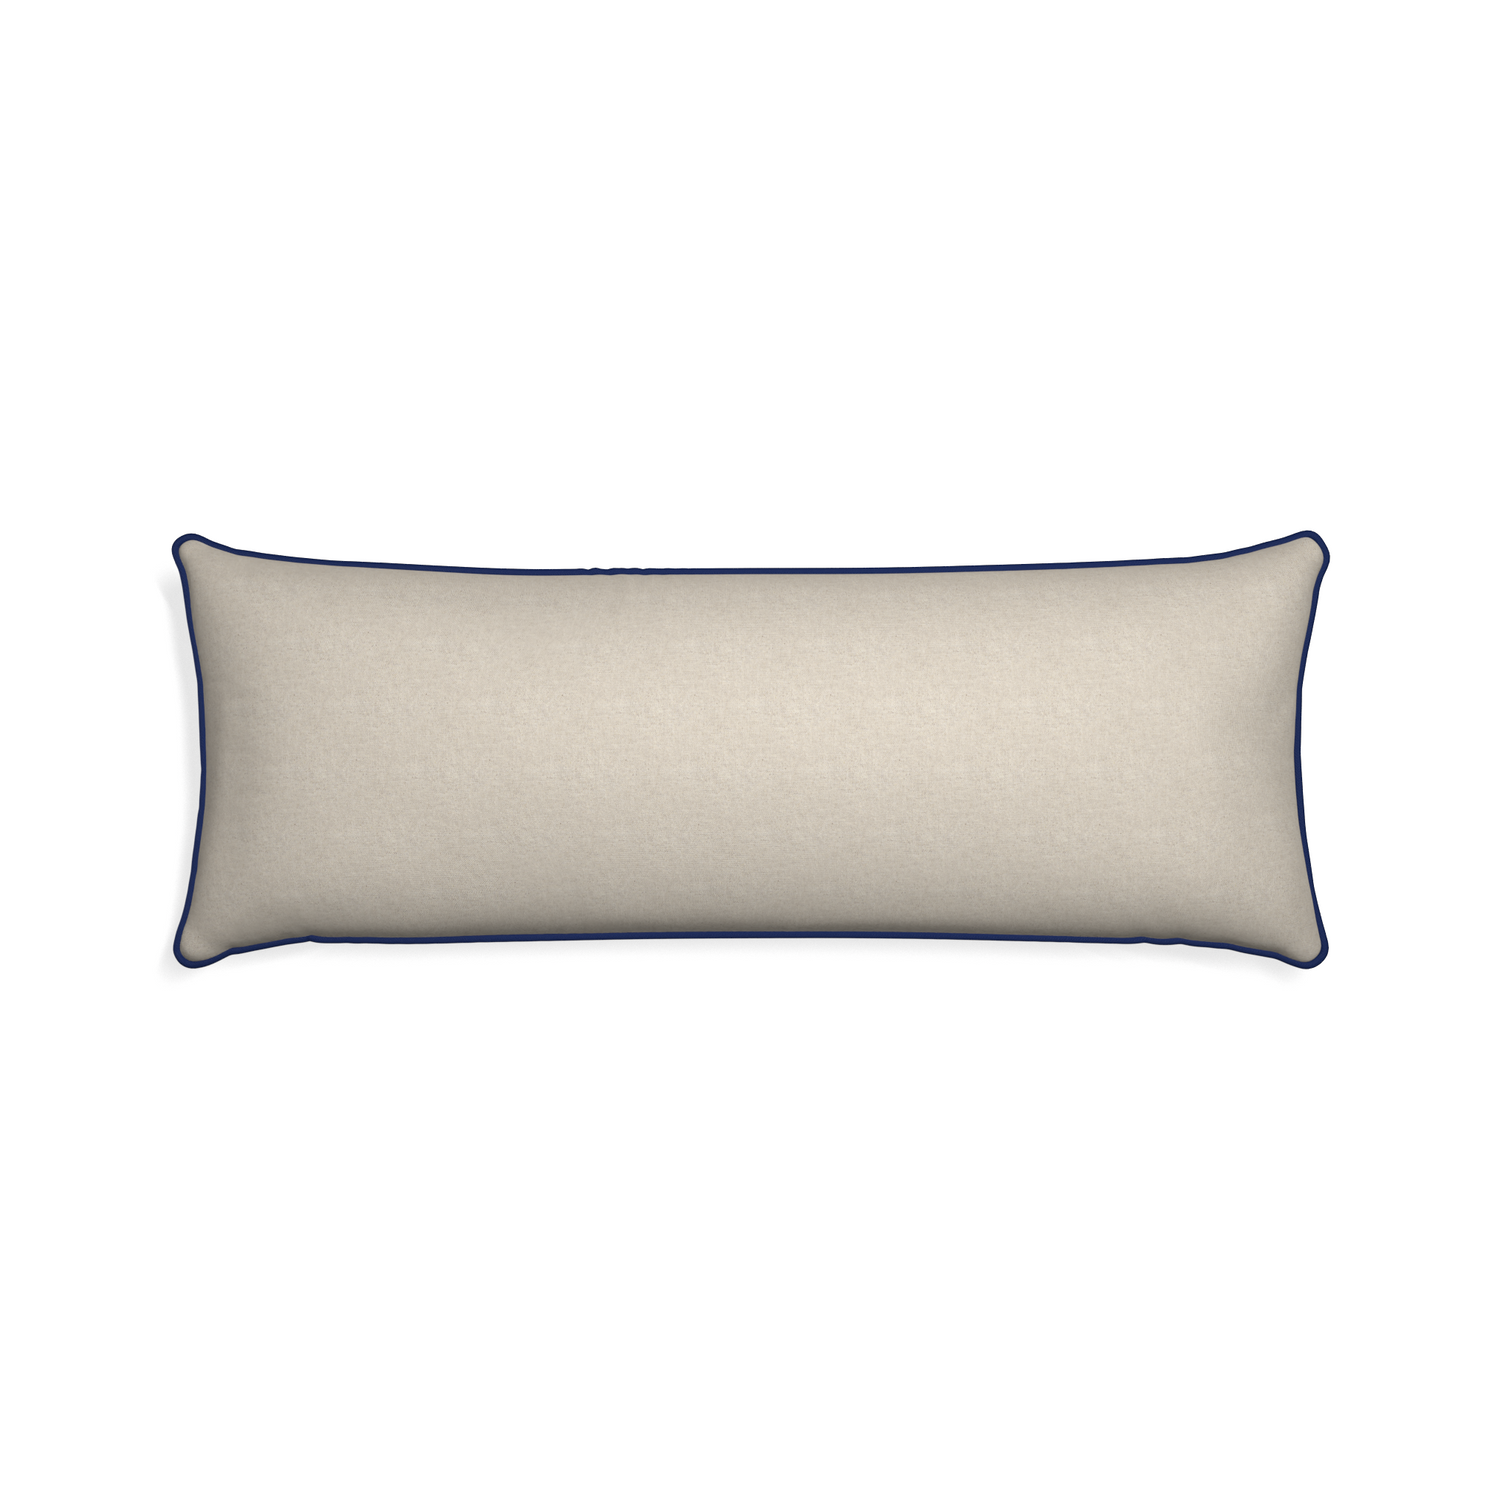 Xl-lumbar oat custom pillow with midnight piping on white background